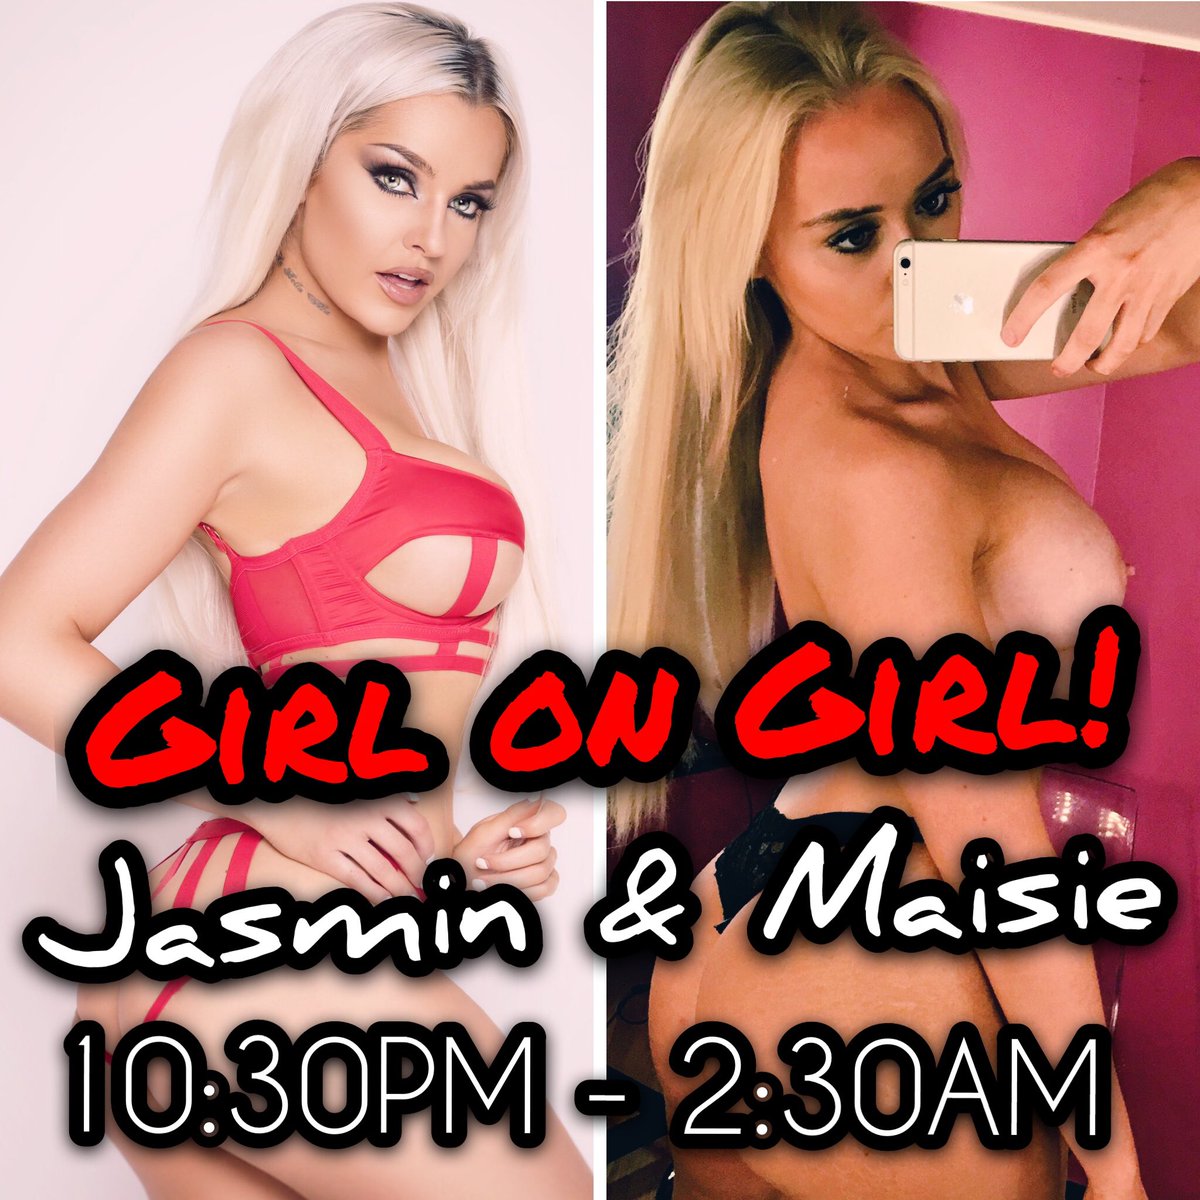 Who's up for GIRL ON GIRL action? 😈With @itsJasMarie &amp; Maisie Leigh it's going to be double trouble! Watch only on https://t.co/QL3uLDpJ7A 🔞 https://t.co/iXzzcxnyI0